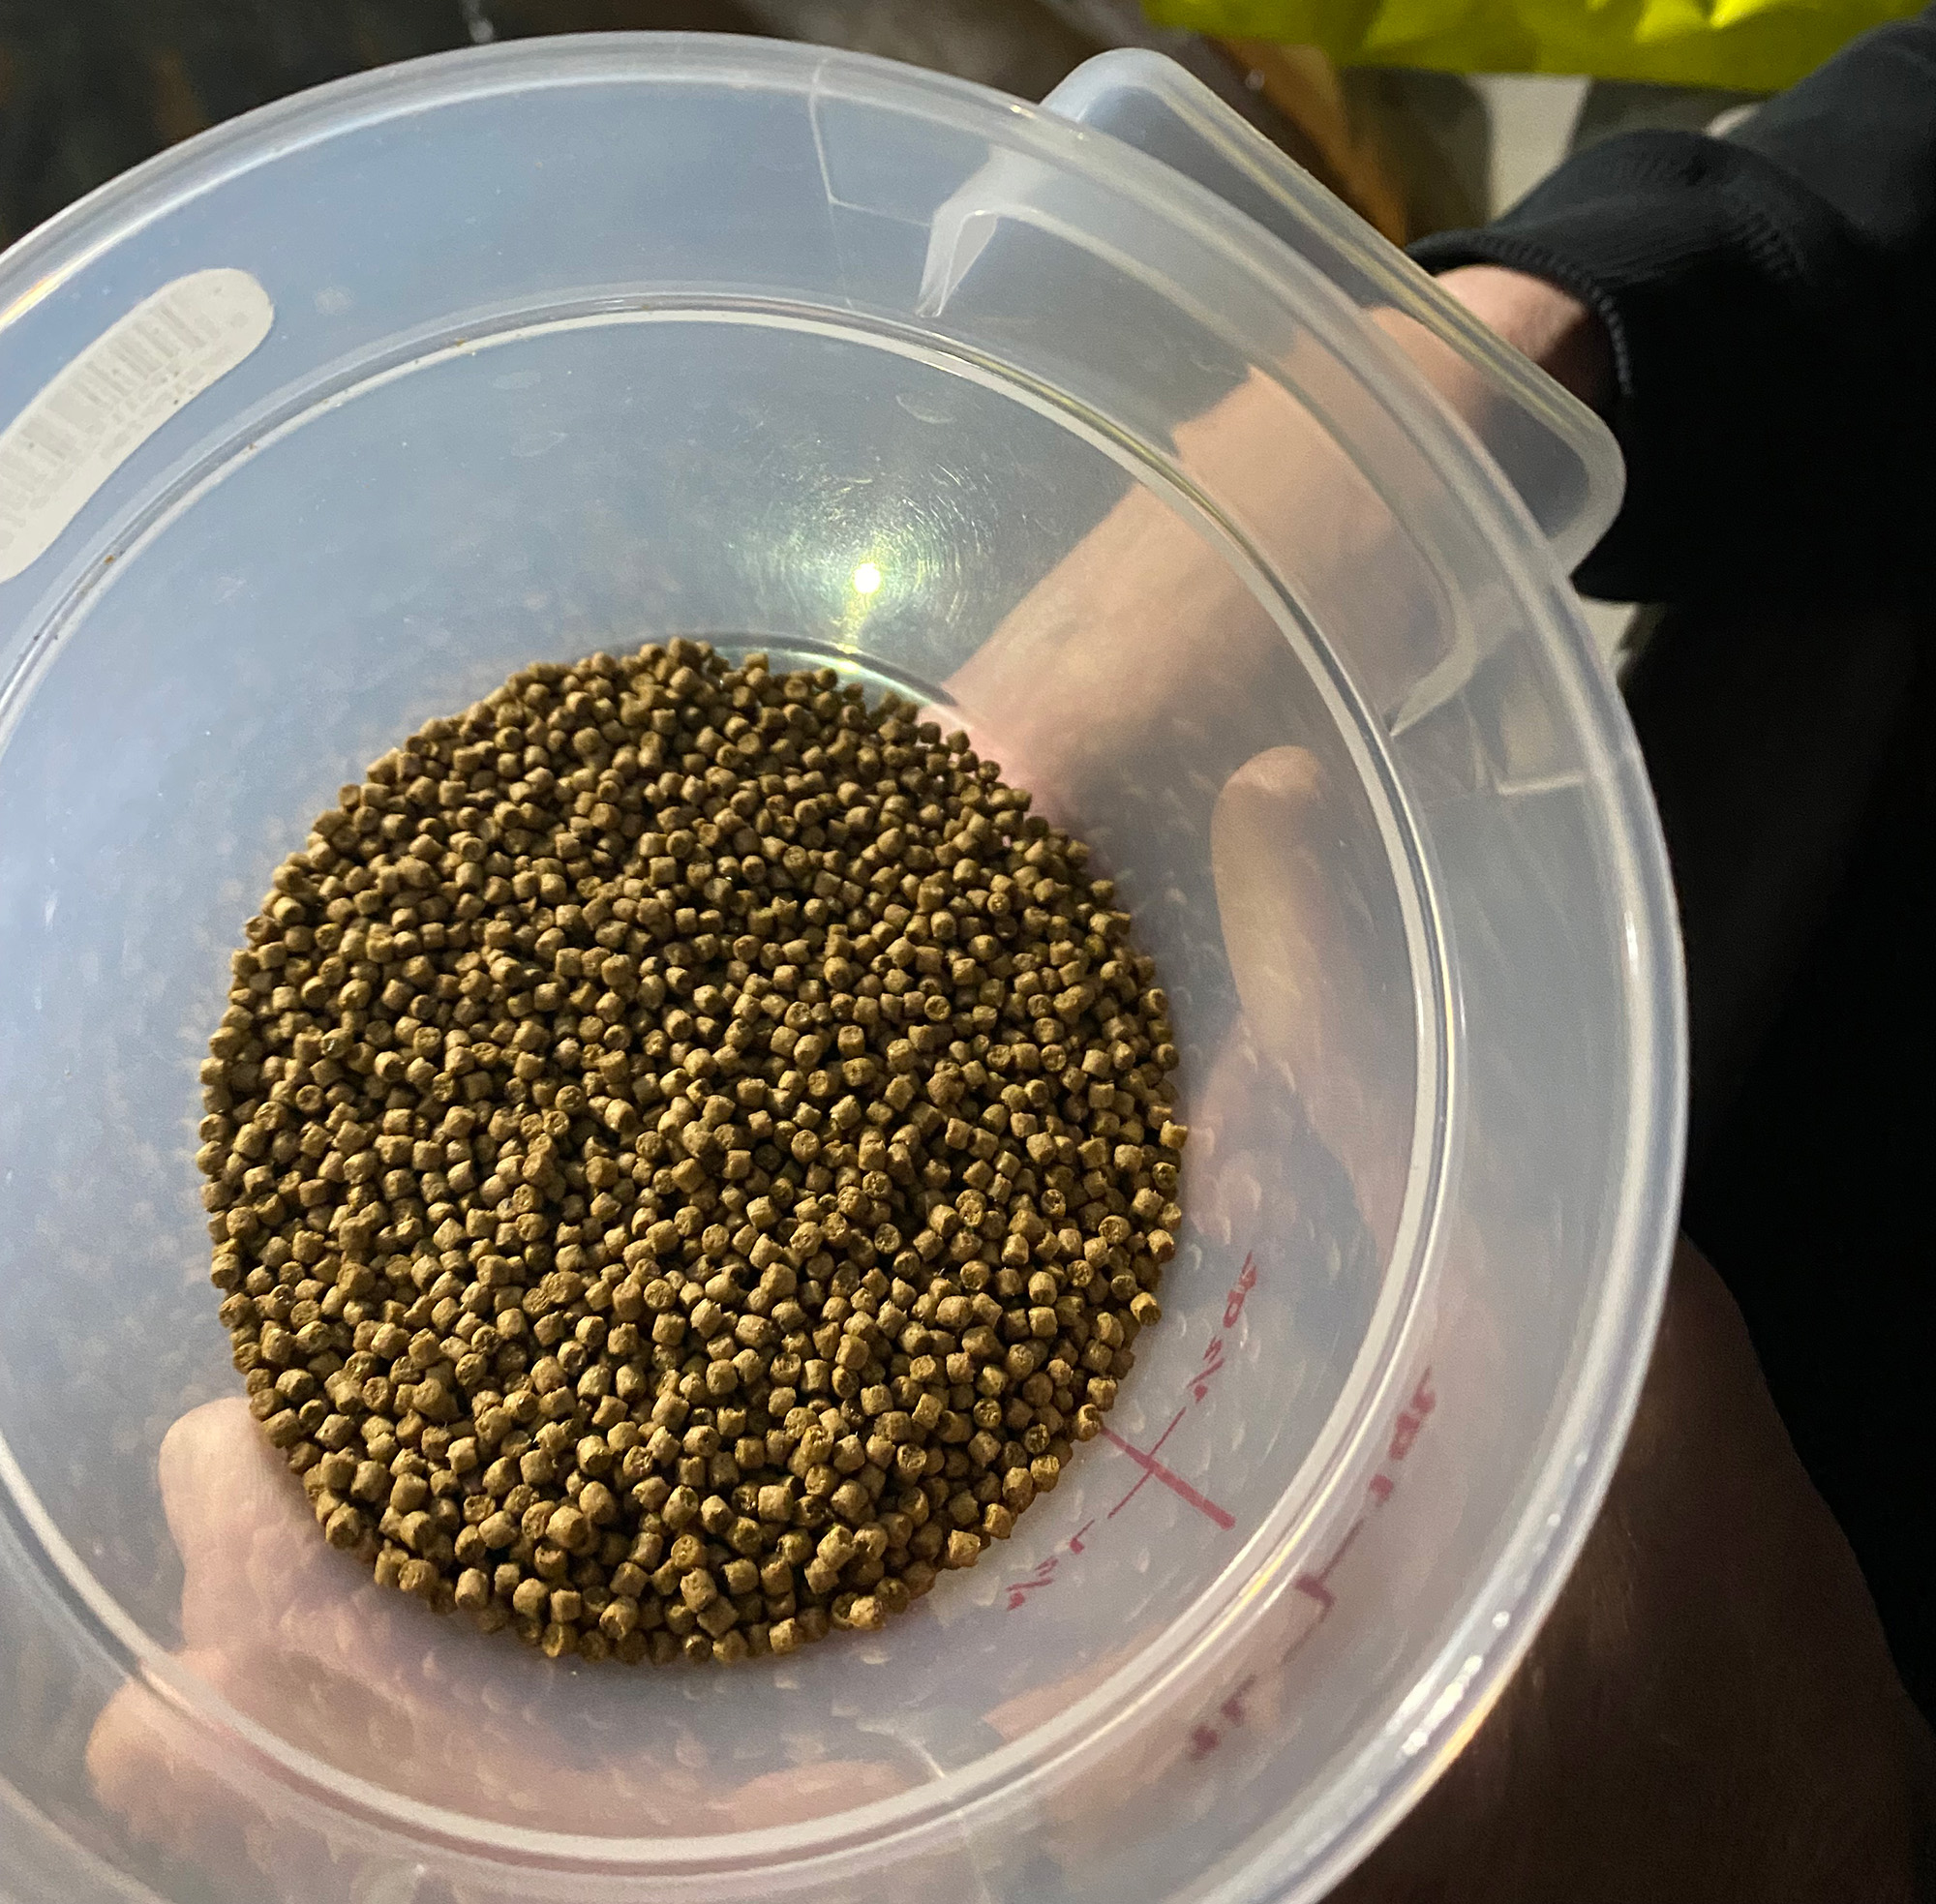 Plastic container with pellet-size fish food